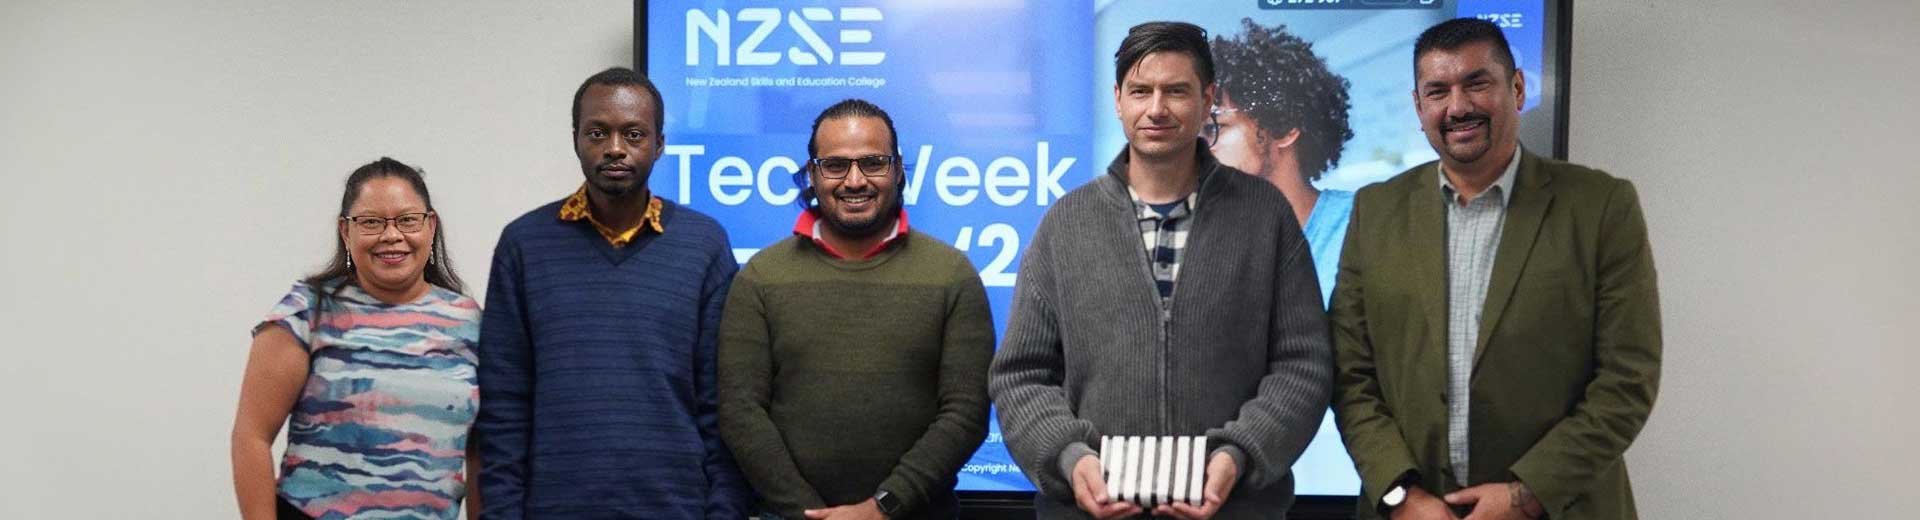 NZSE Staff at Tech Day